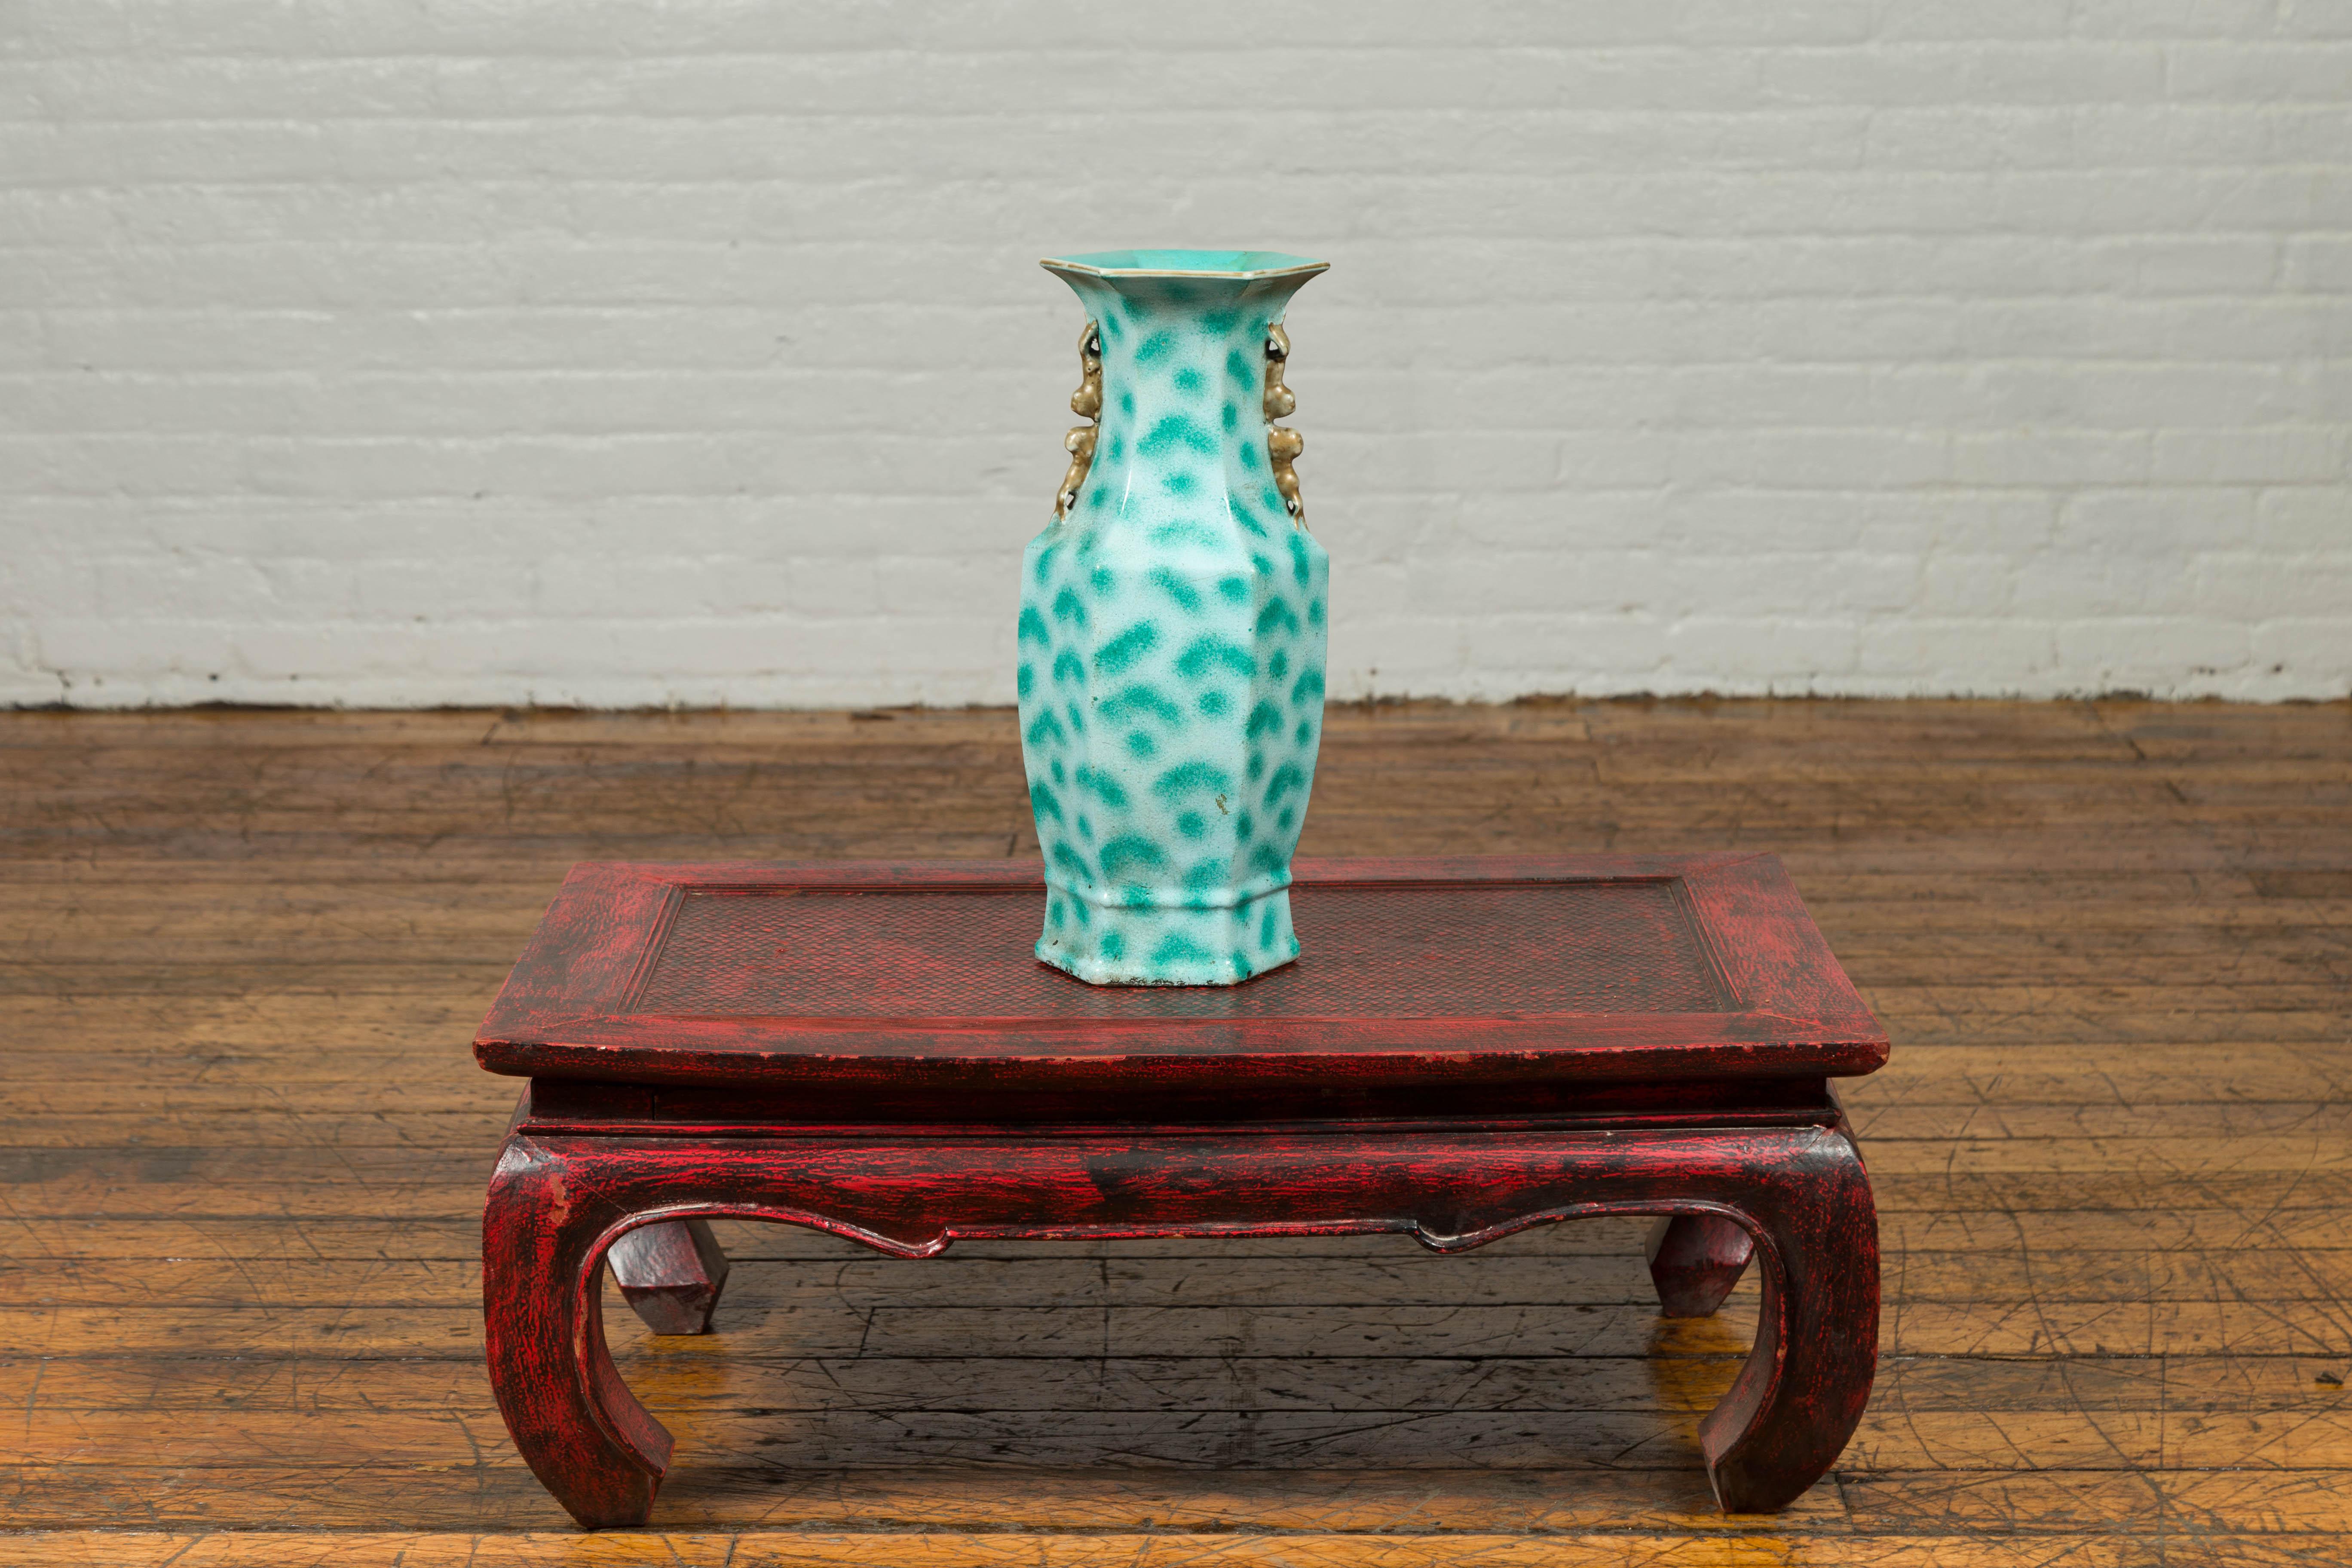 Vintage Chinese Turquoise Vase with Spotted Design and Hexagonal Neck In Good Condition For Sale In Yonkers, NY